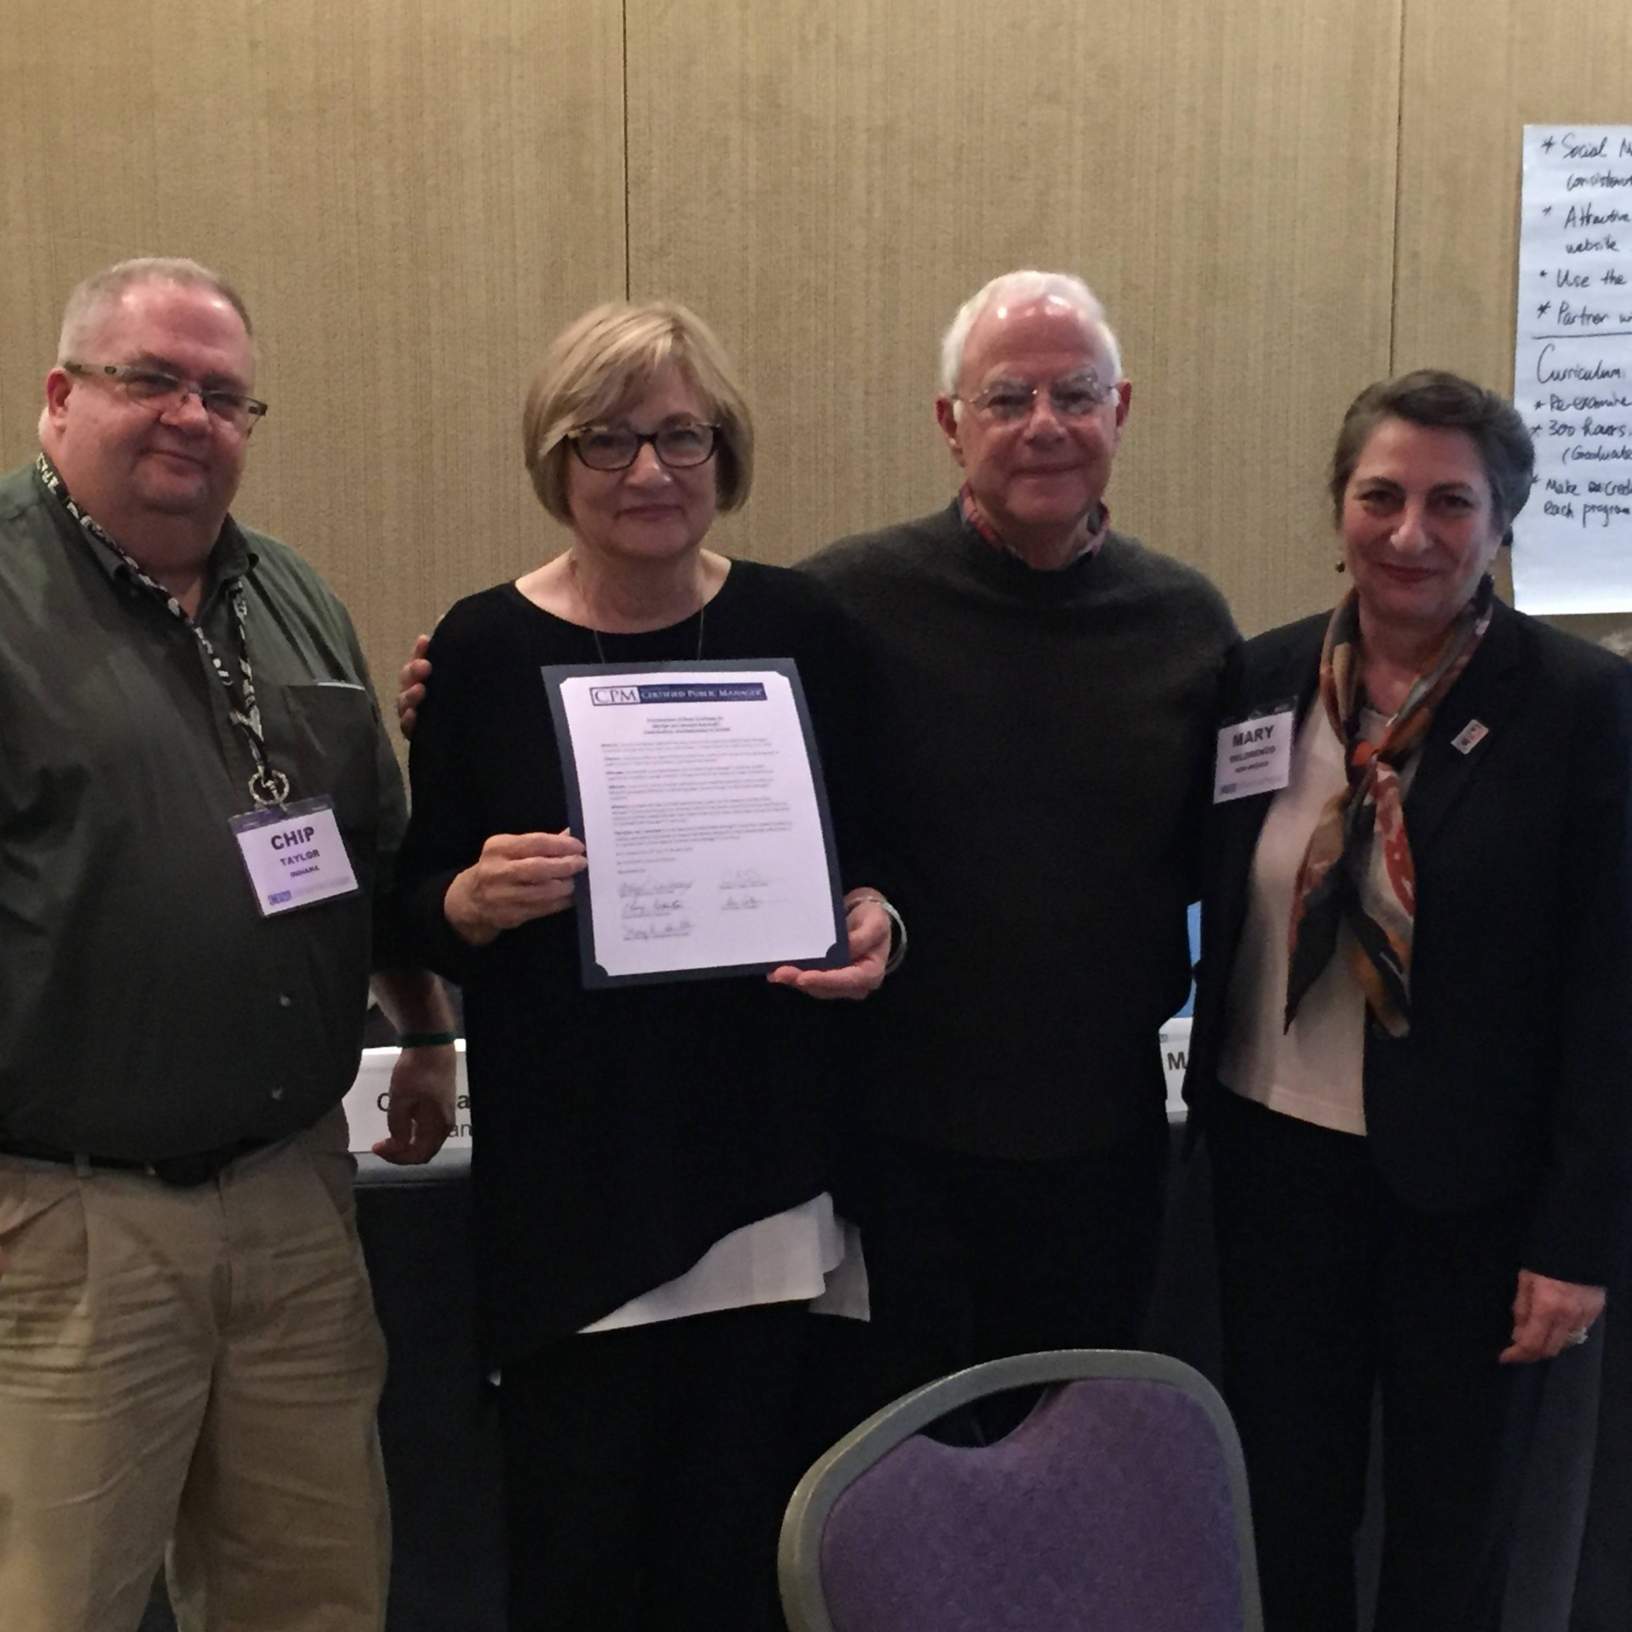 Howard & Marilyn Balanoff (center left & center right) receive Proclamation of Appreciation from Mary DeLorenzo, Chair of the NCPM Consortium (right) & Chip Taylor, Chair Elect of NCPM Consortium (left).